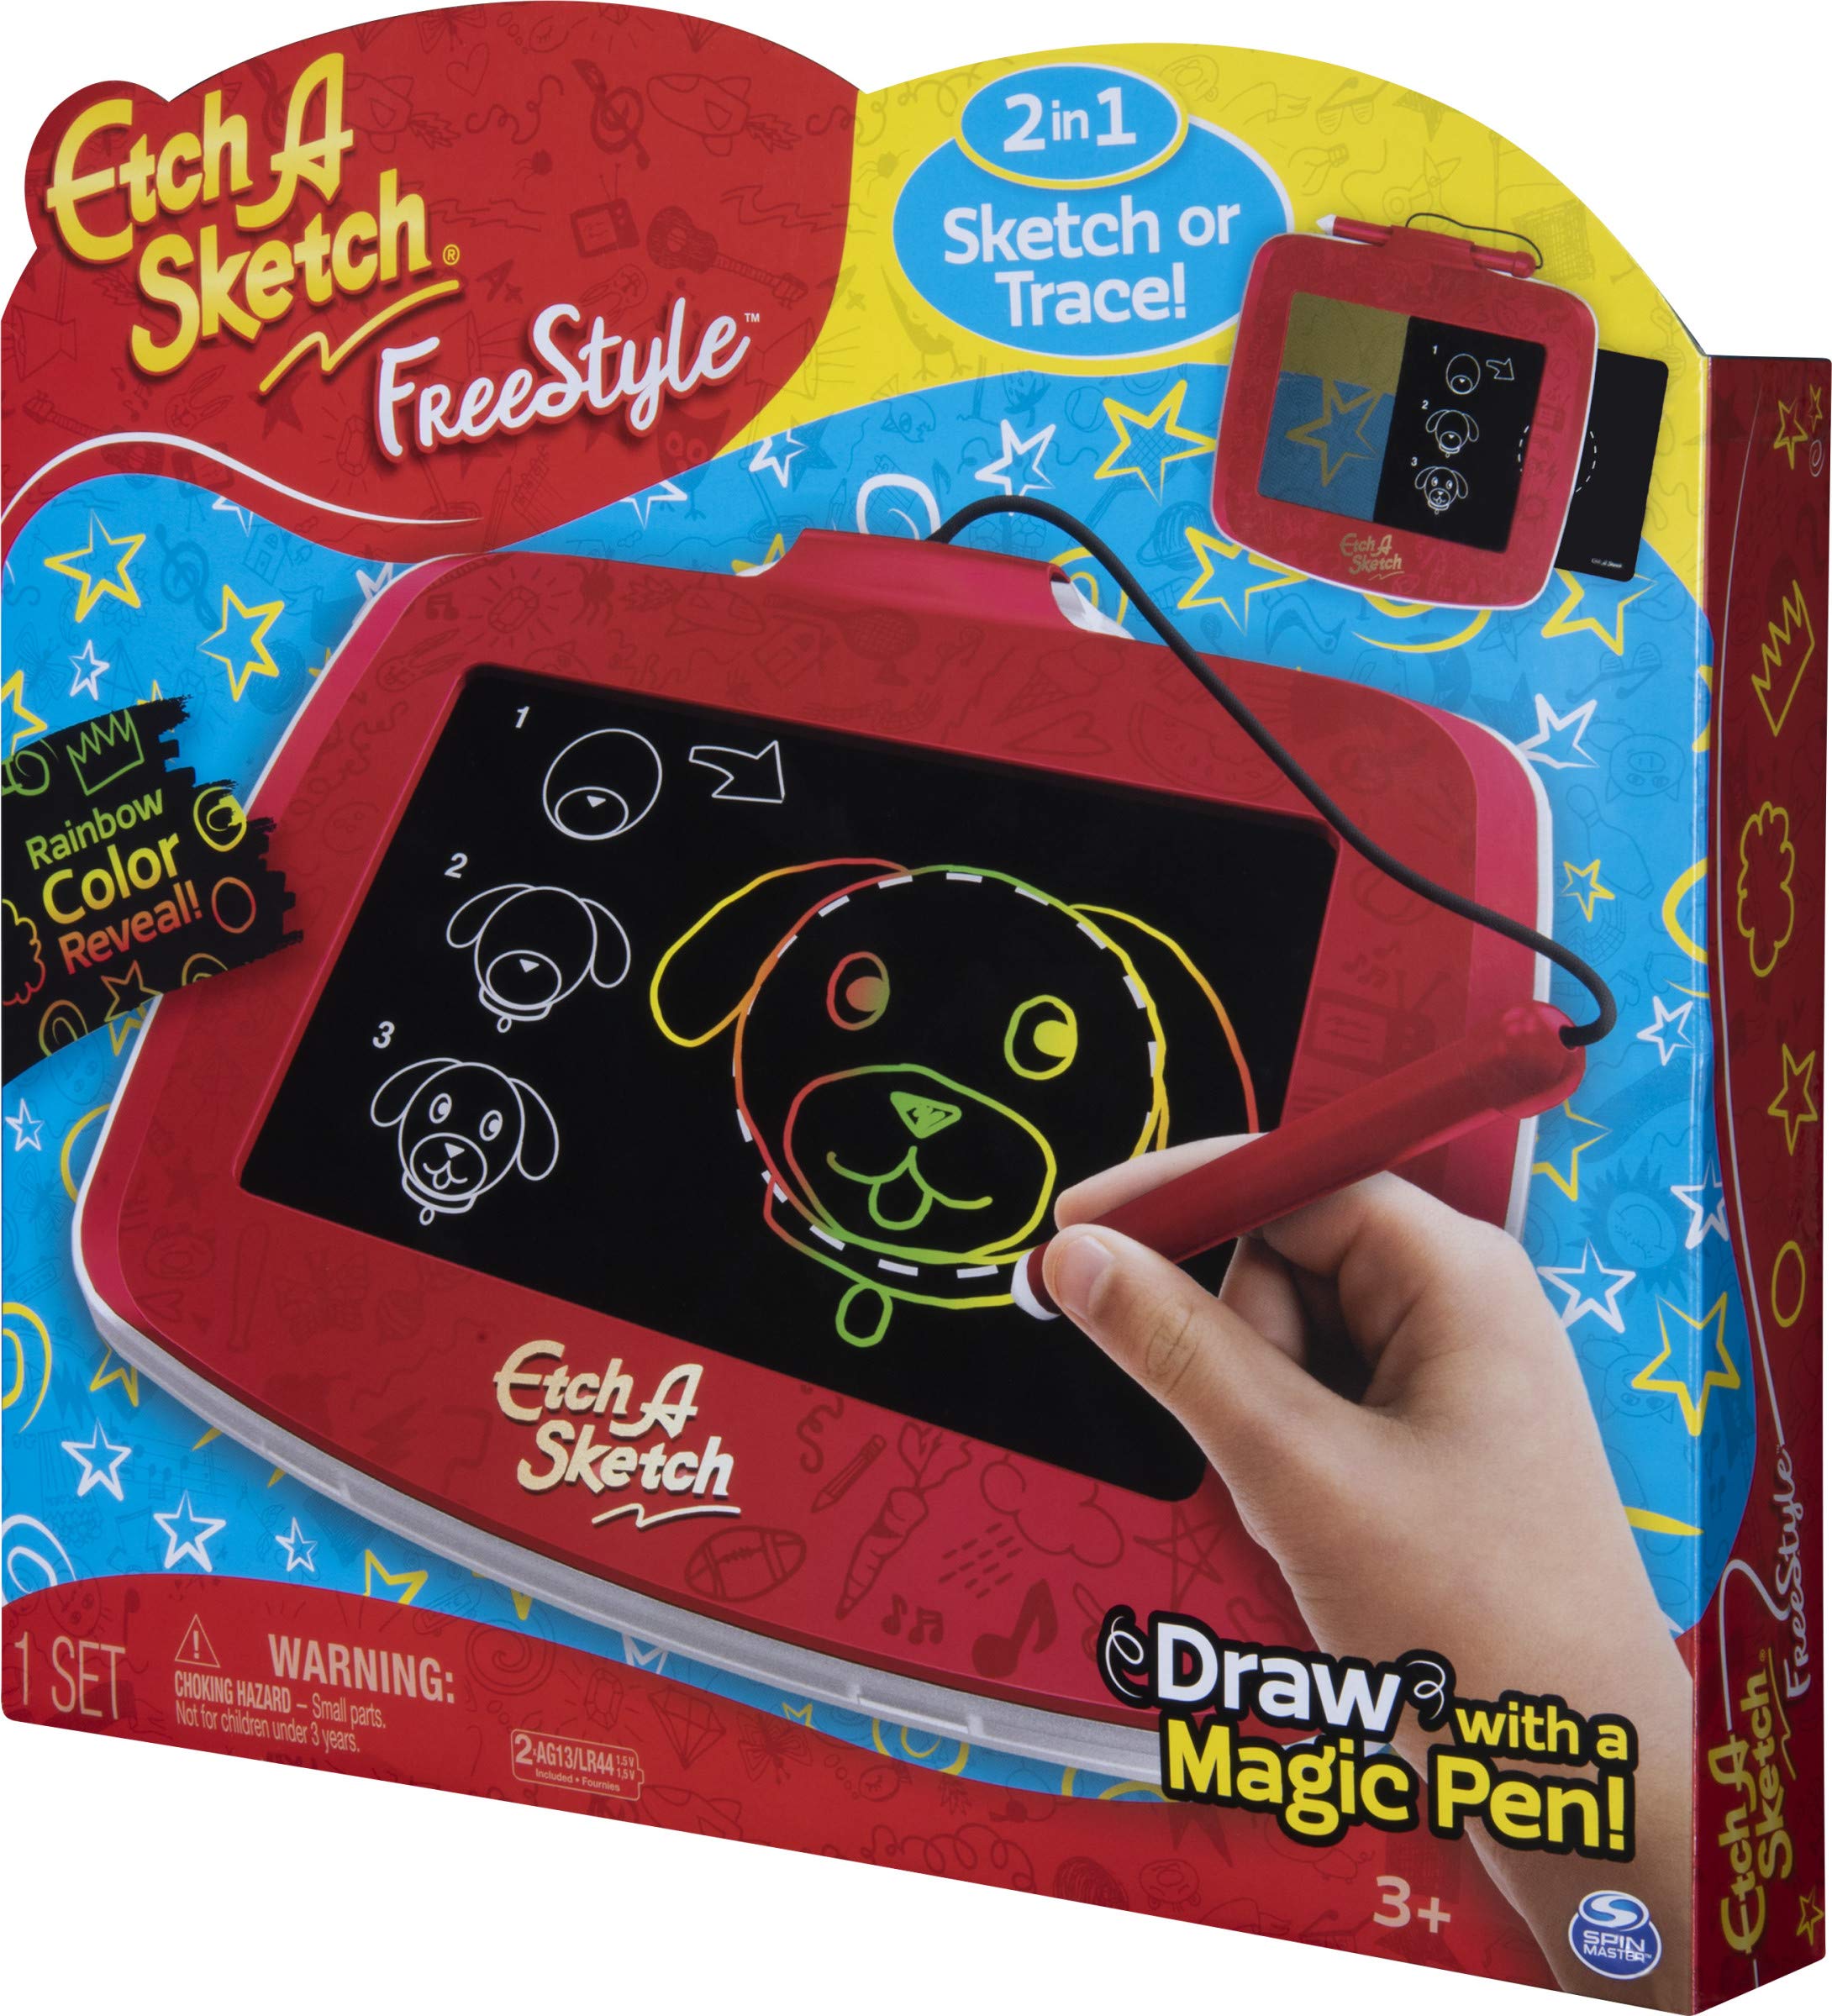 Etch A Sketch Freestyle, 2-in-1 Drawing and Tracing Pad with Magic Pen Stylus (Edition May Vary)